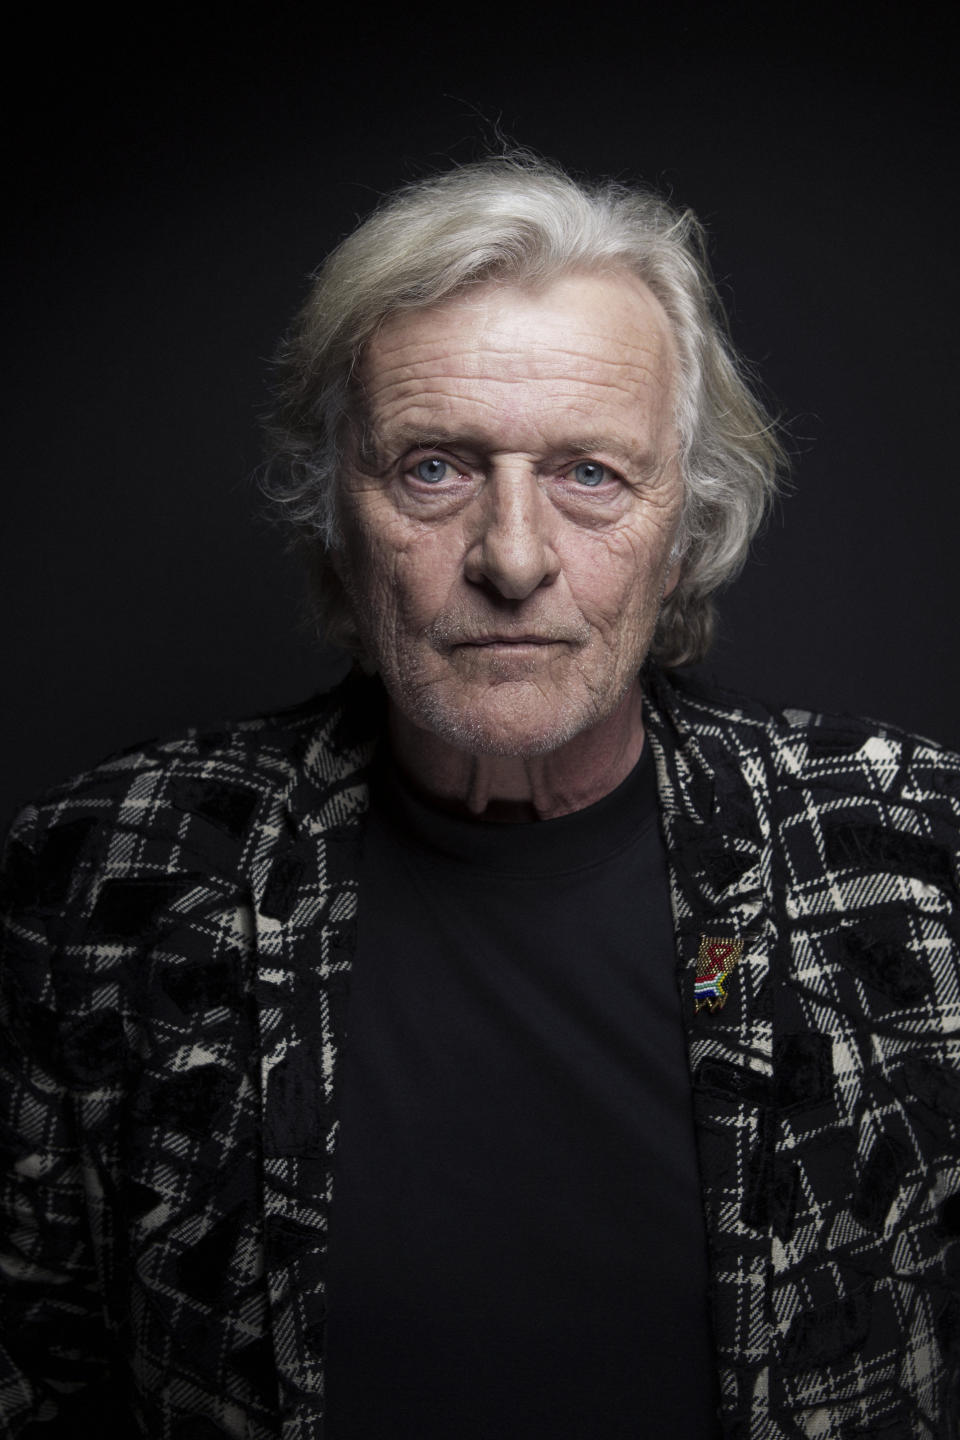 FILE - This Jan. 19, 2013 file photo shows actor Rutger Hauer at the Sundance Film Festival in Park City, Utah. Hauer, who specialized in menacing roles, including a memorable turn as a murderous android in "Blade Runner" opposite Harrison Ford, has died July 19 at his home in the Netherlands. He was 75. (Photo by Victoria Will/Invision/AP, File)